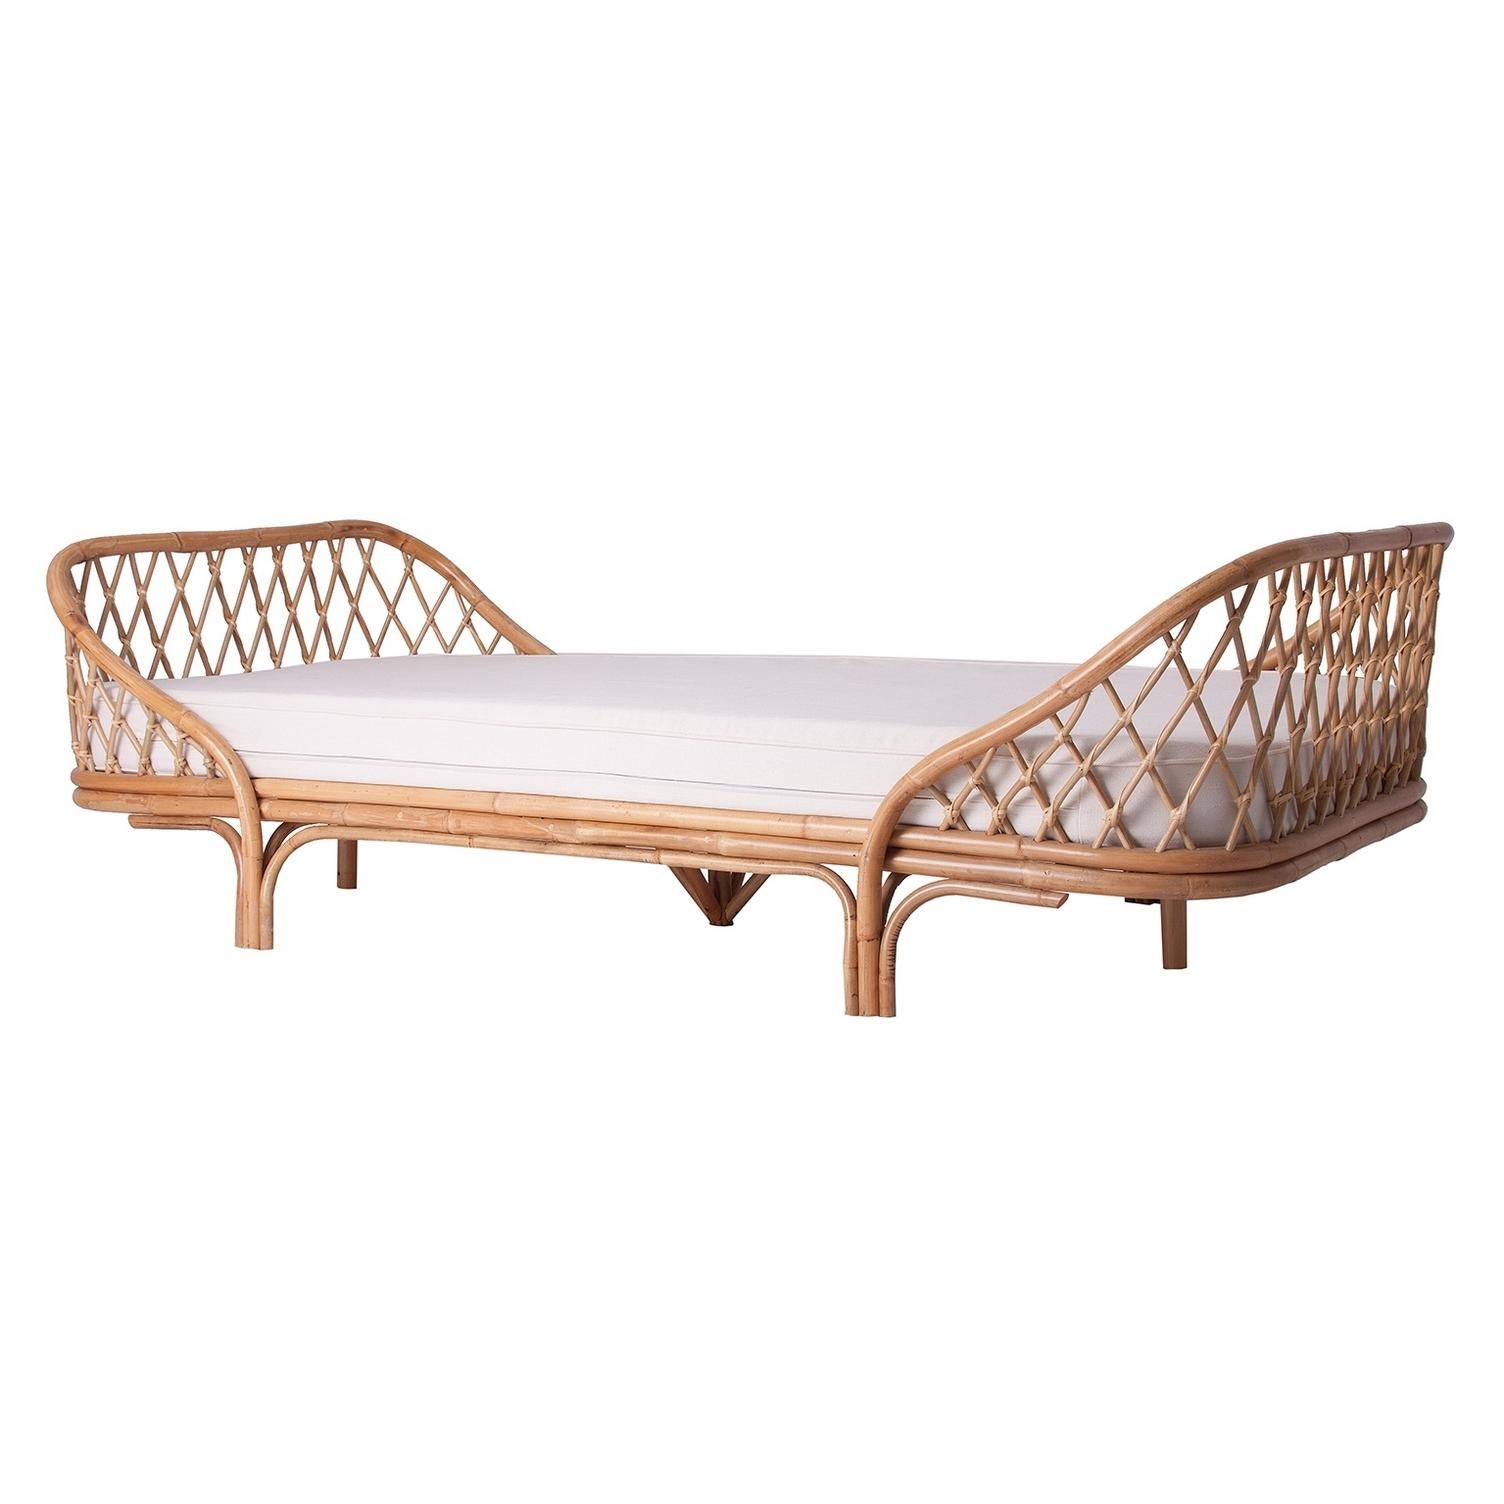 1960s design style rattan daybed frame with cushion seat.